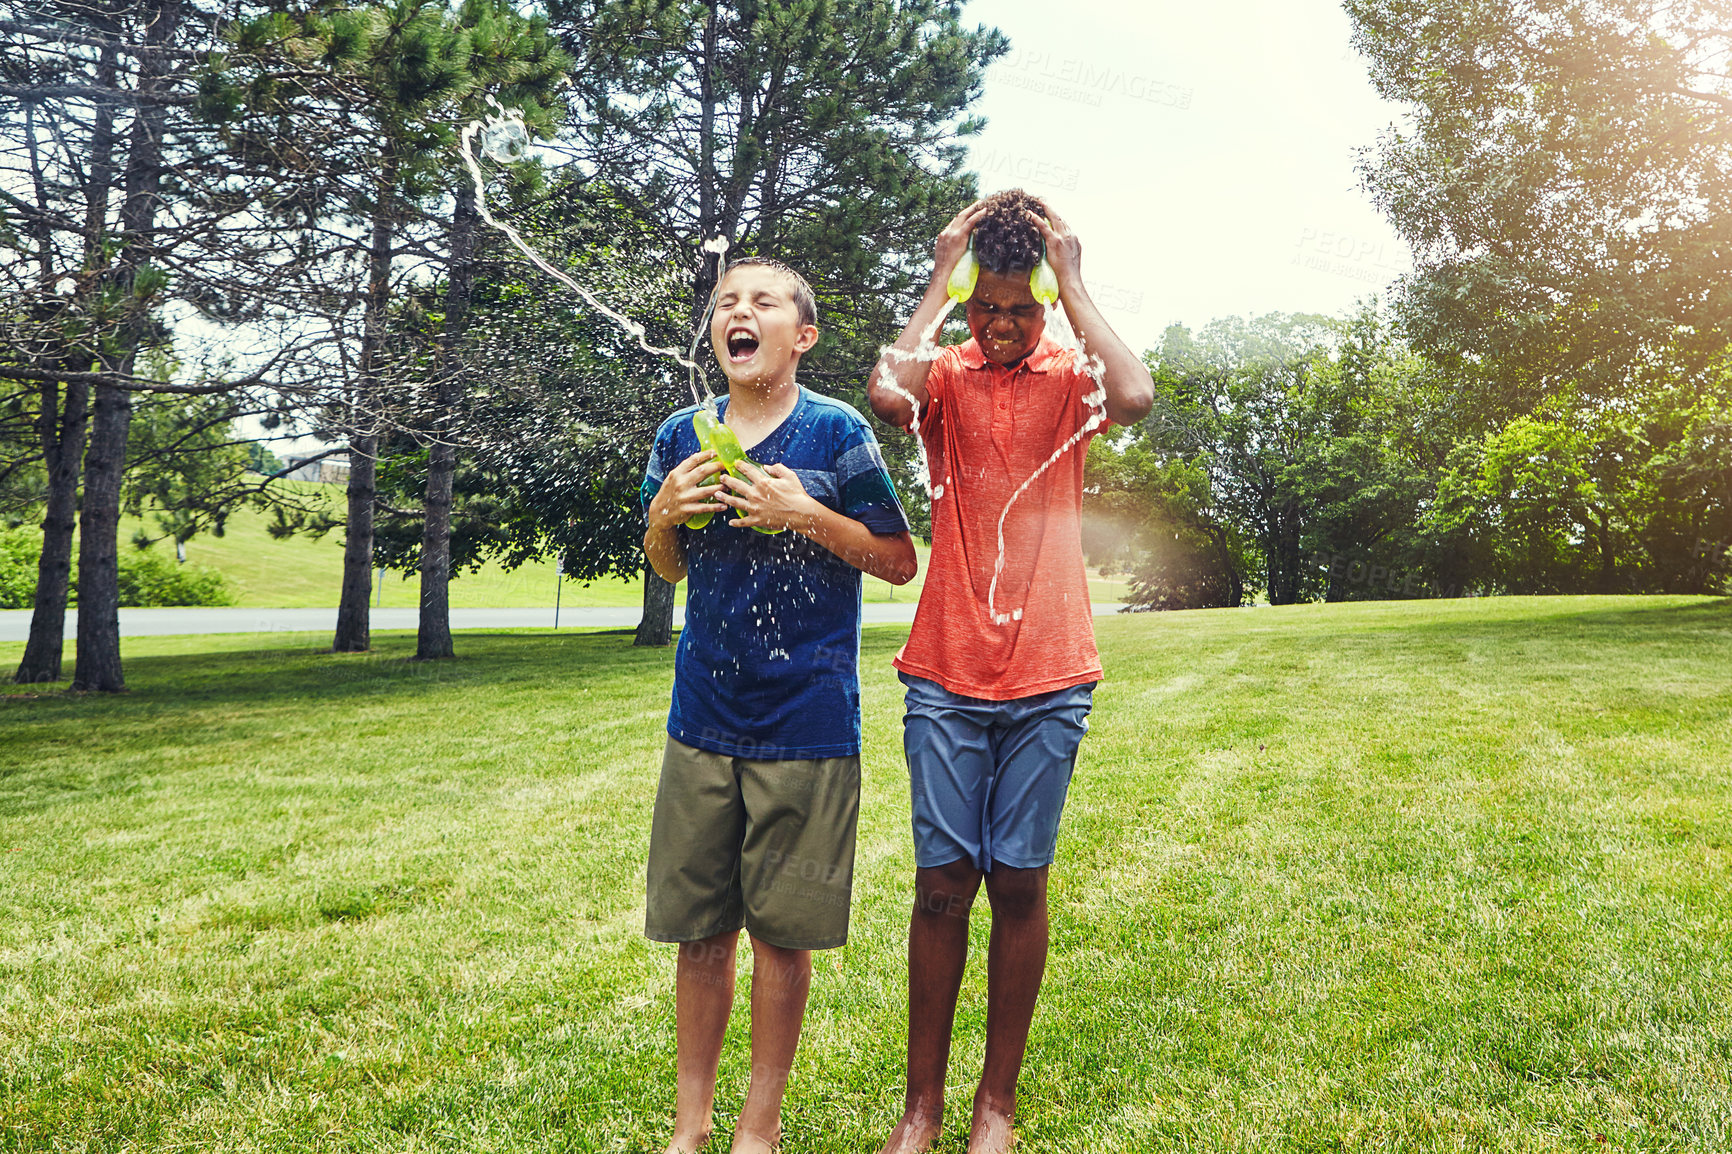 Buy stock photo Shot of adorable young boys playing with water balloons outdoors